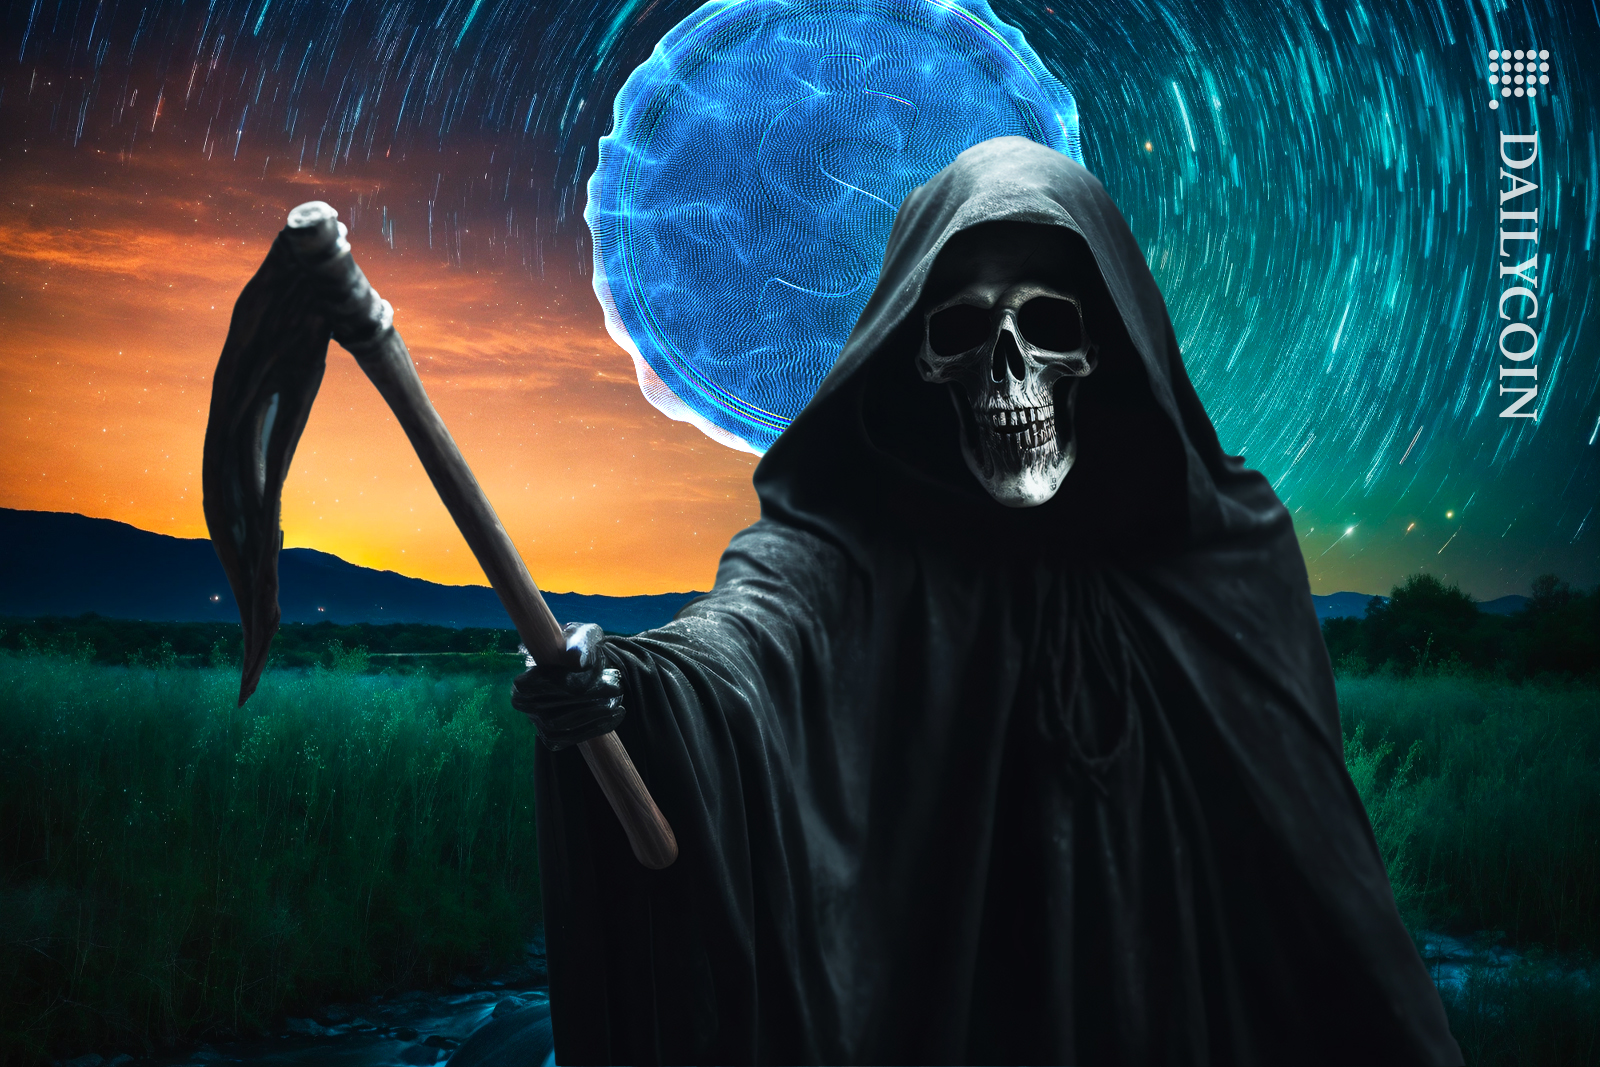 Grim Reaper in the night in New Zealand giving a warning to stablecoin.